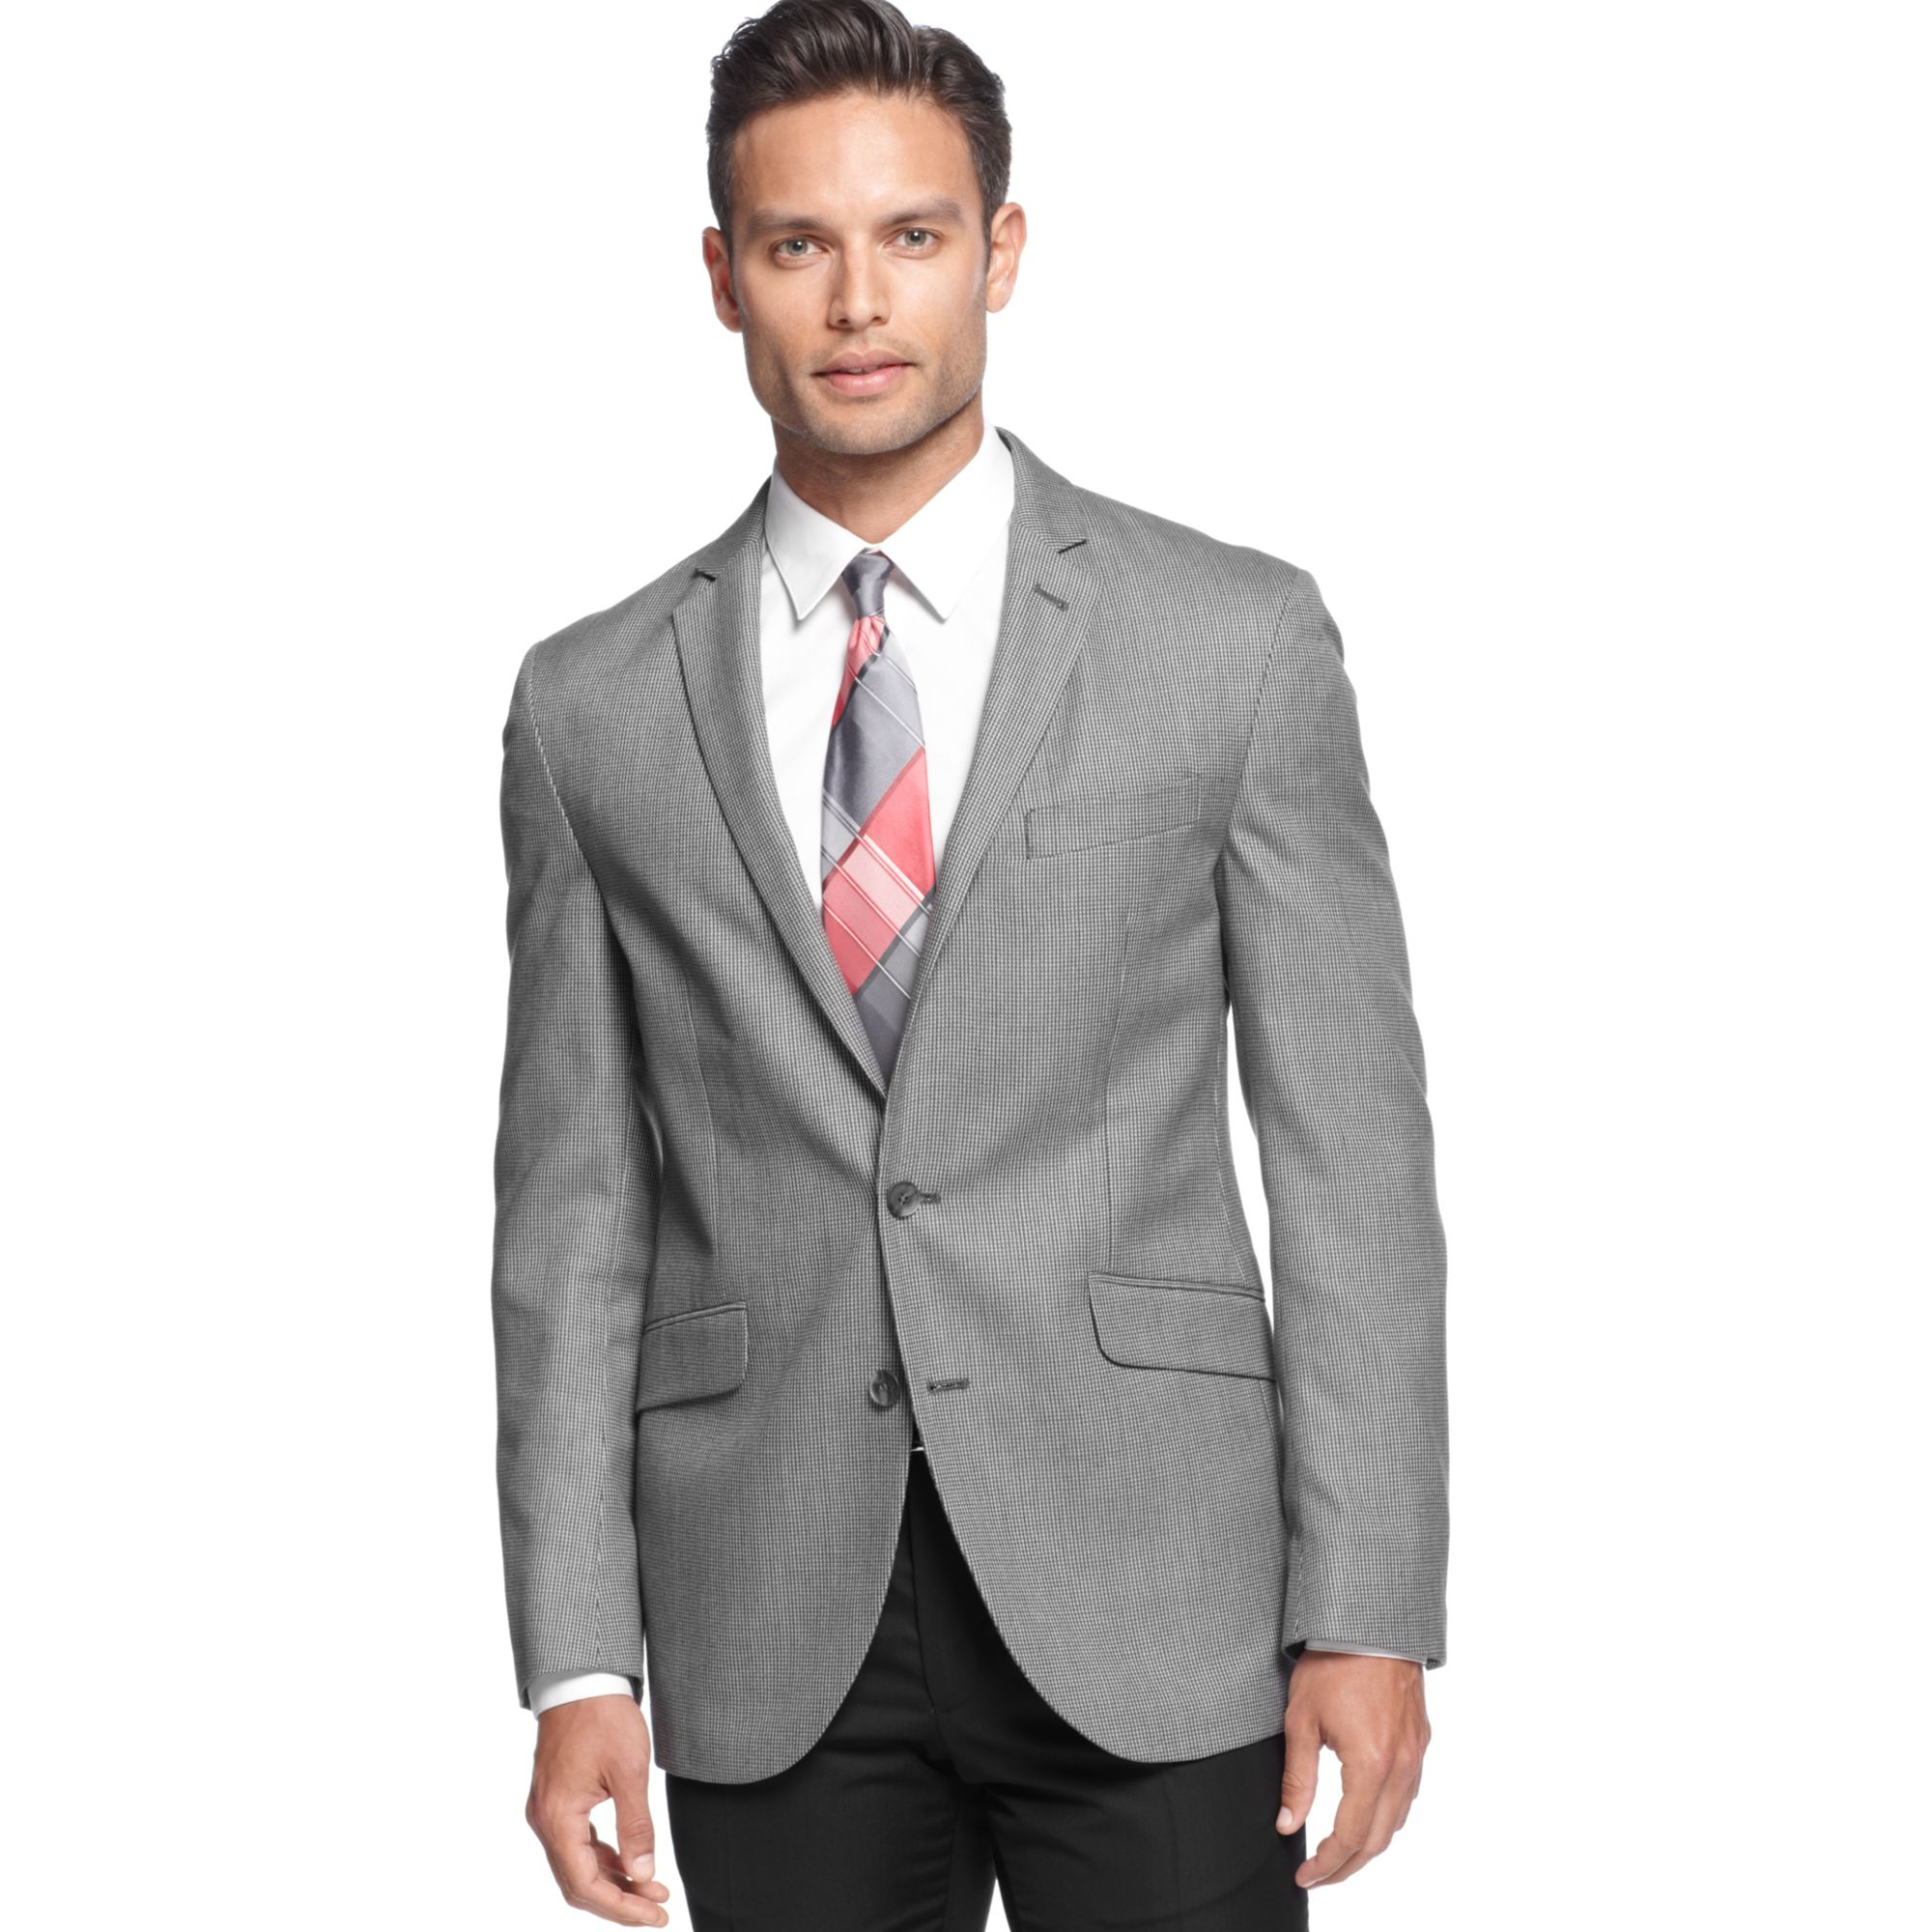 Lyst - Kenneth Cole Reaction Grey Check Slimfit Sport Coat in Gray for Men